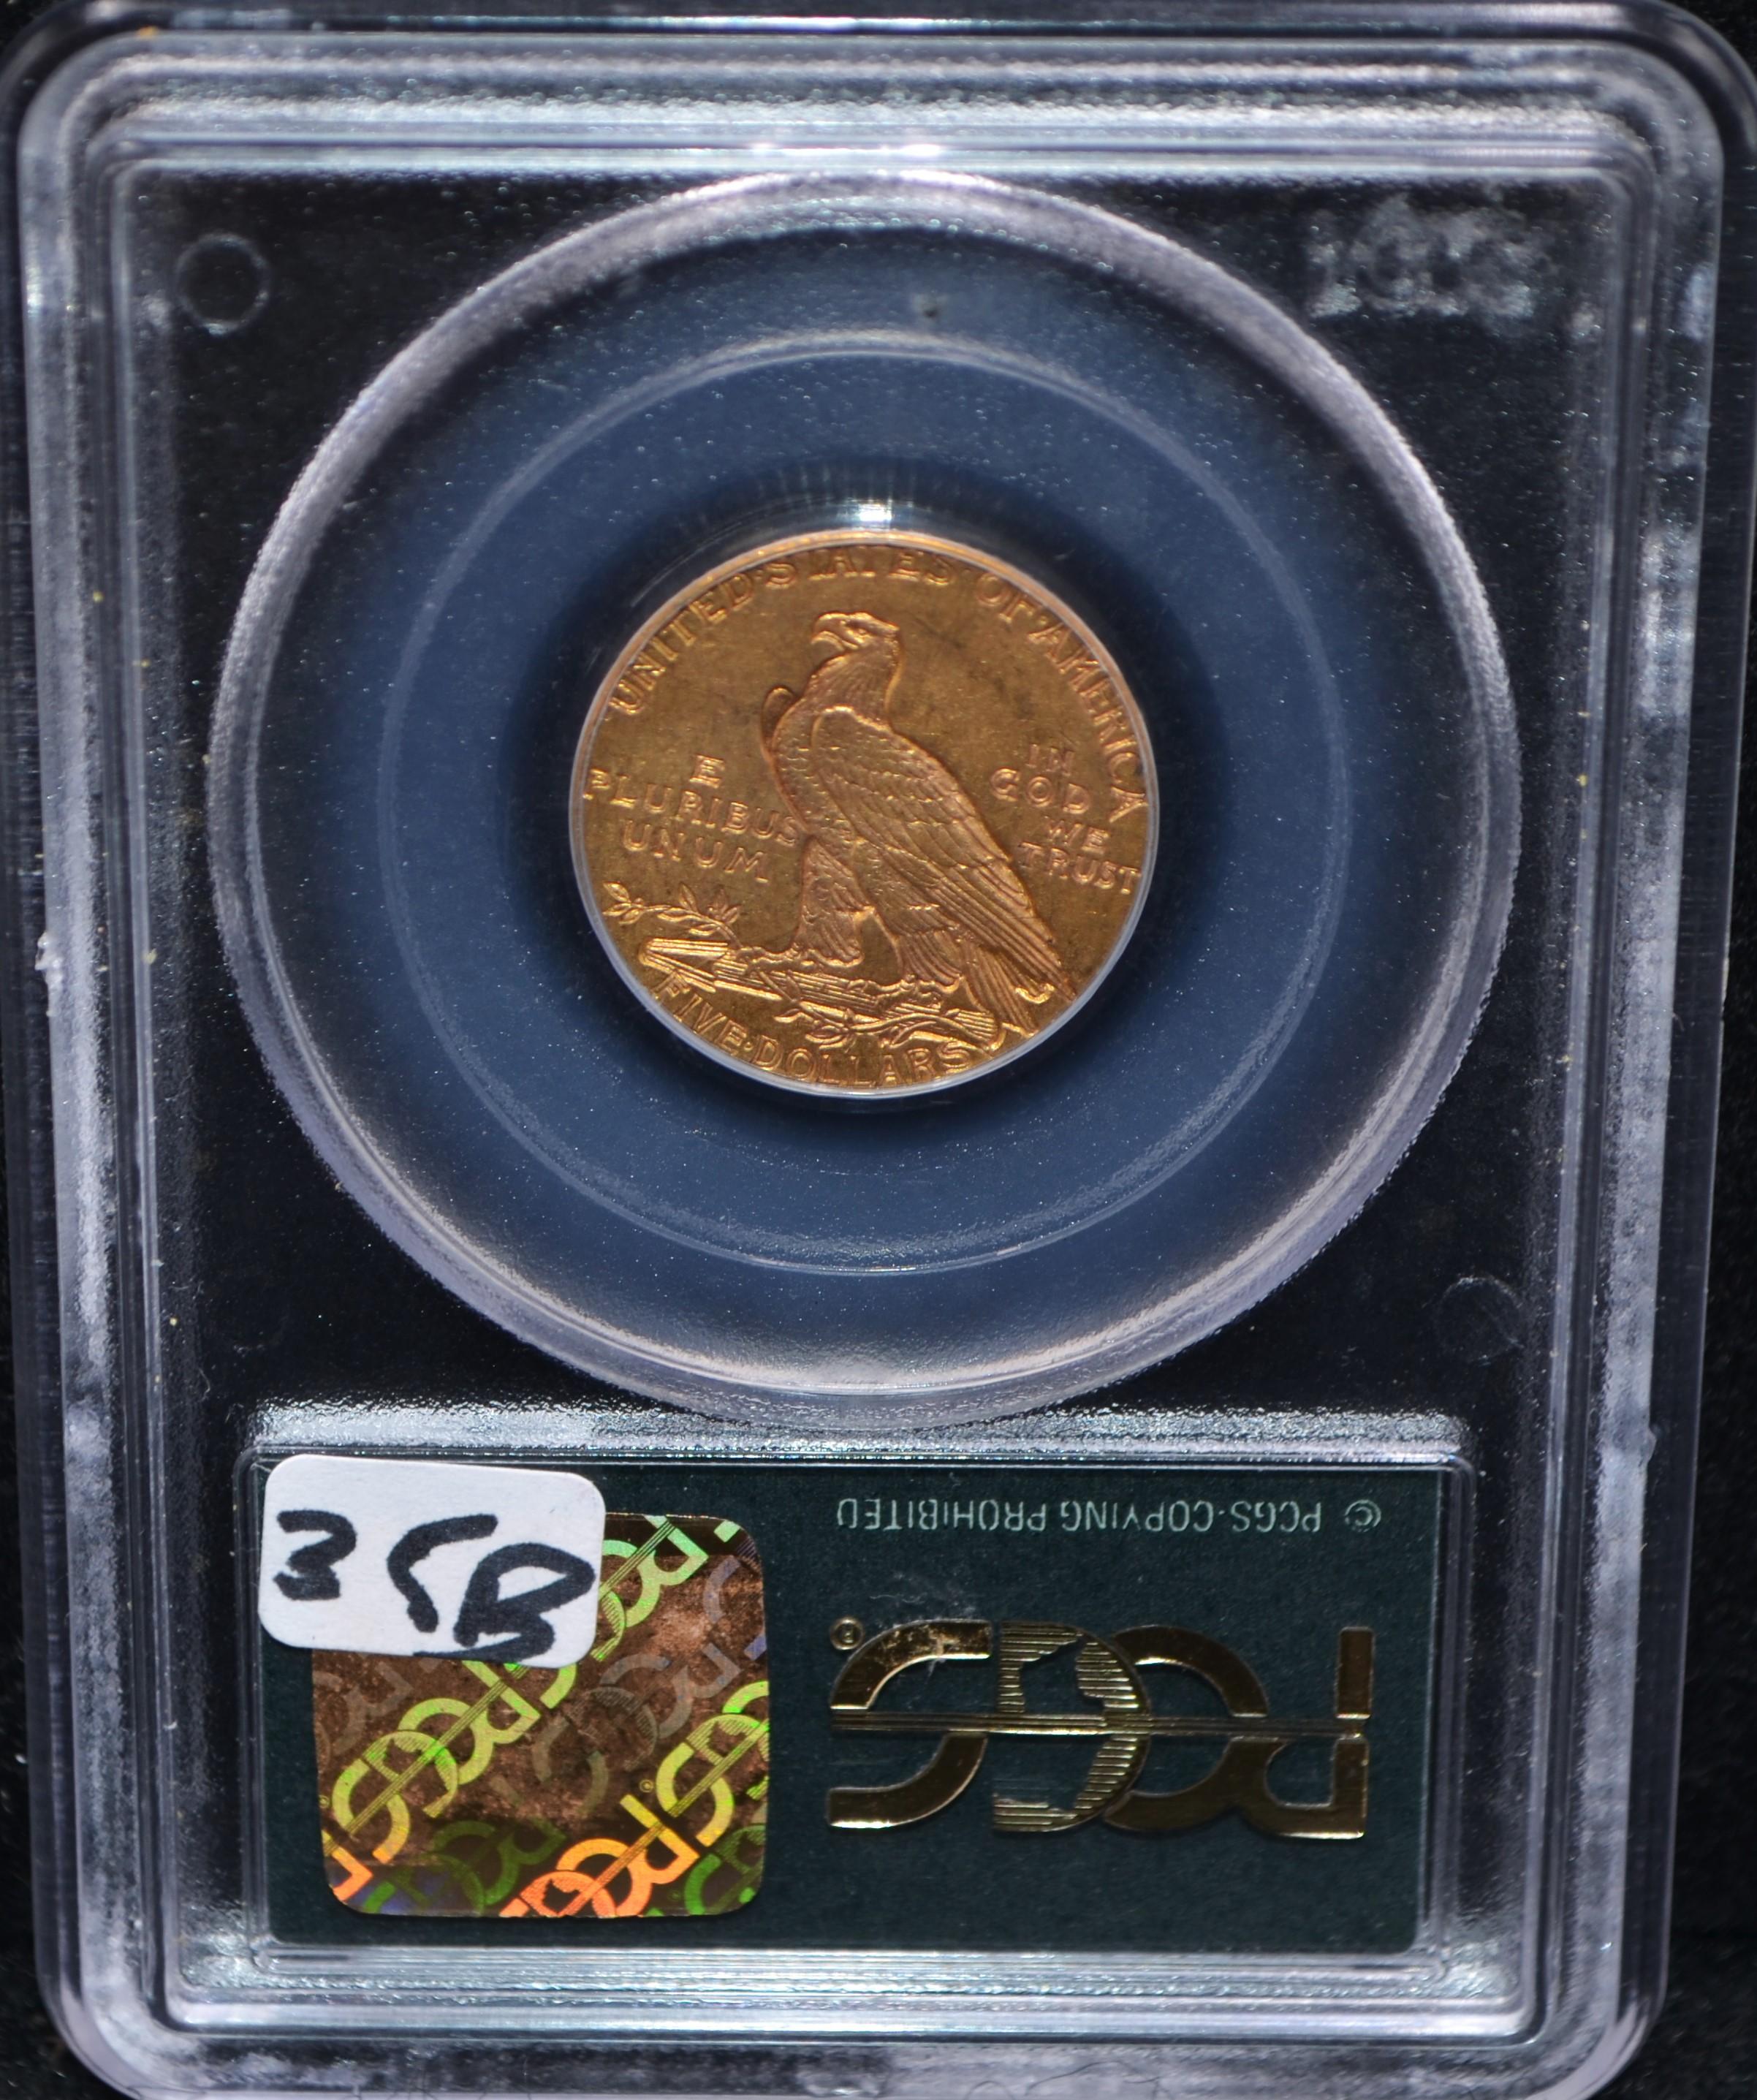 1915 $5 INDIAN HEAD GOLD COIN - PCGS MS61